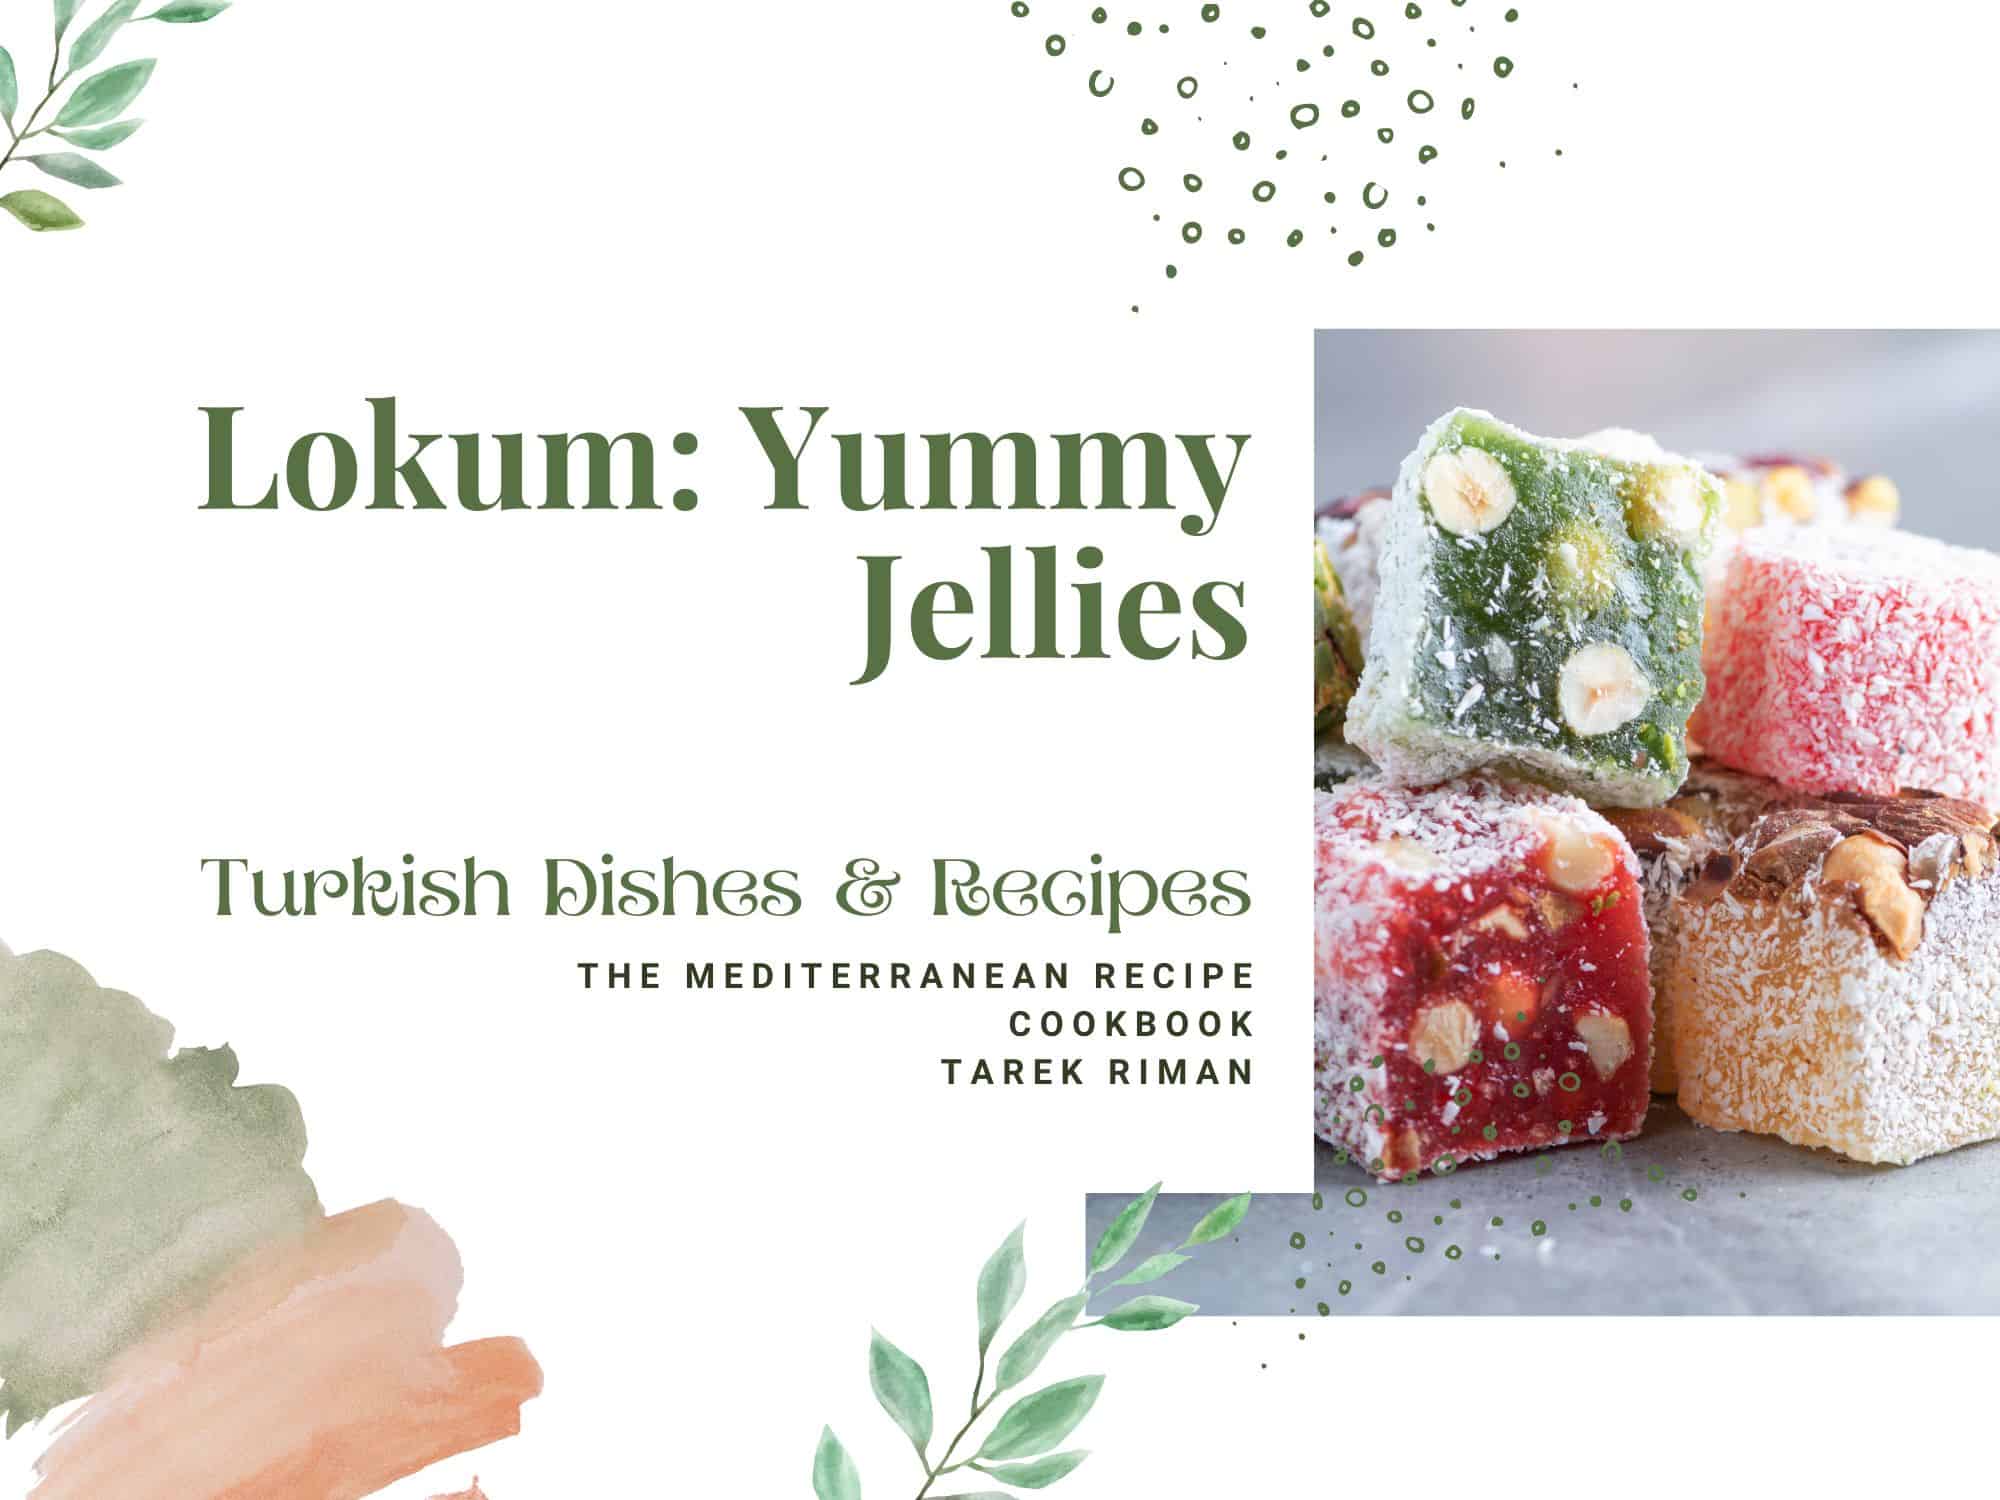 How to Make Lokum: Yummy Jellies - Turkish delight candy